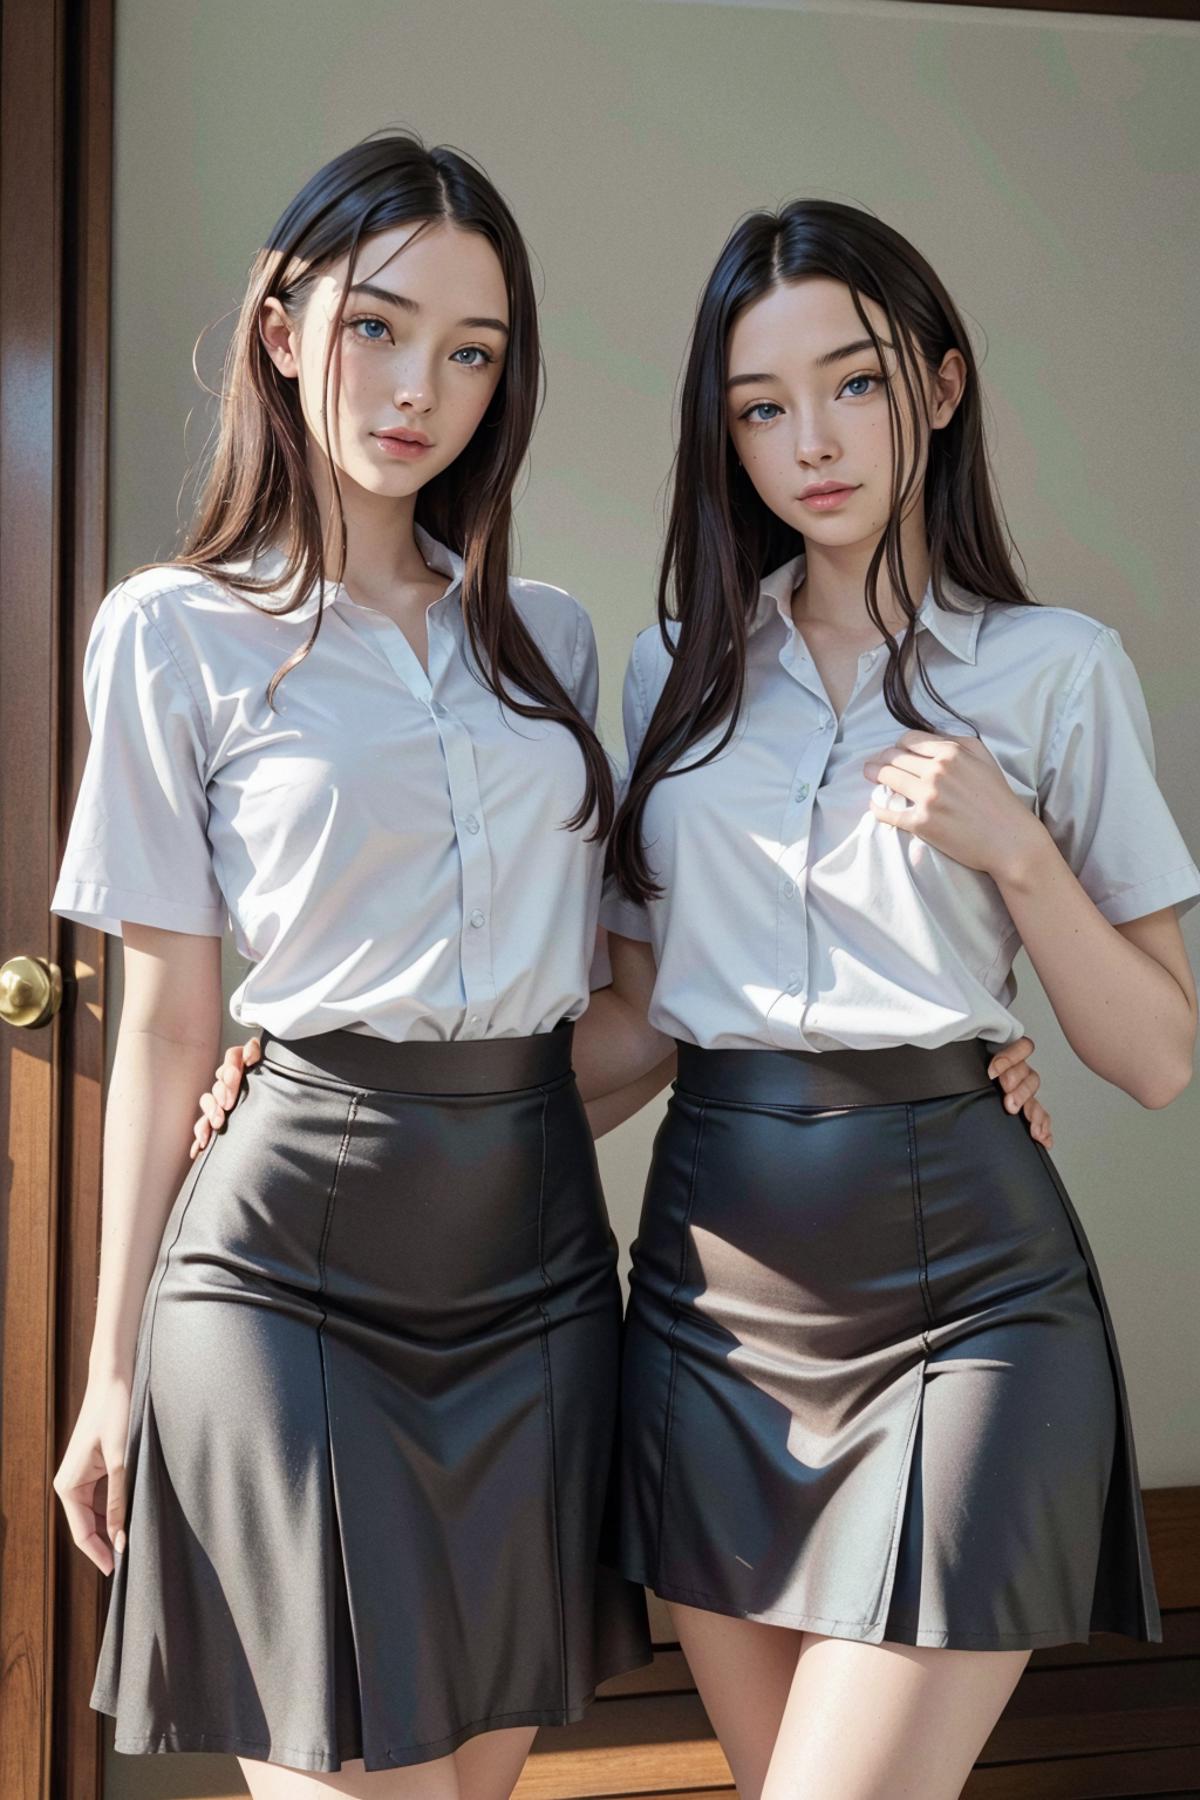 ZH LoRA - The Maddison Twins (Australian OnlyFans models, TikTok and Instagram influencers) image by ZombieHead